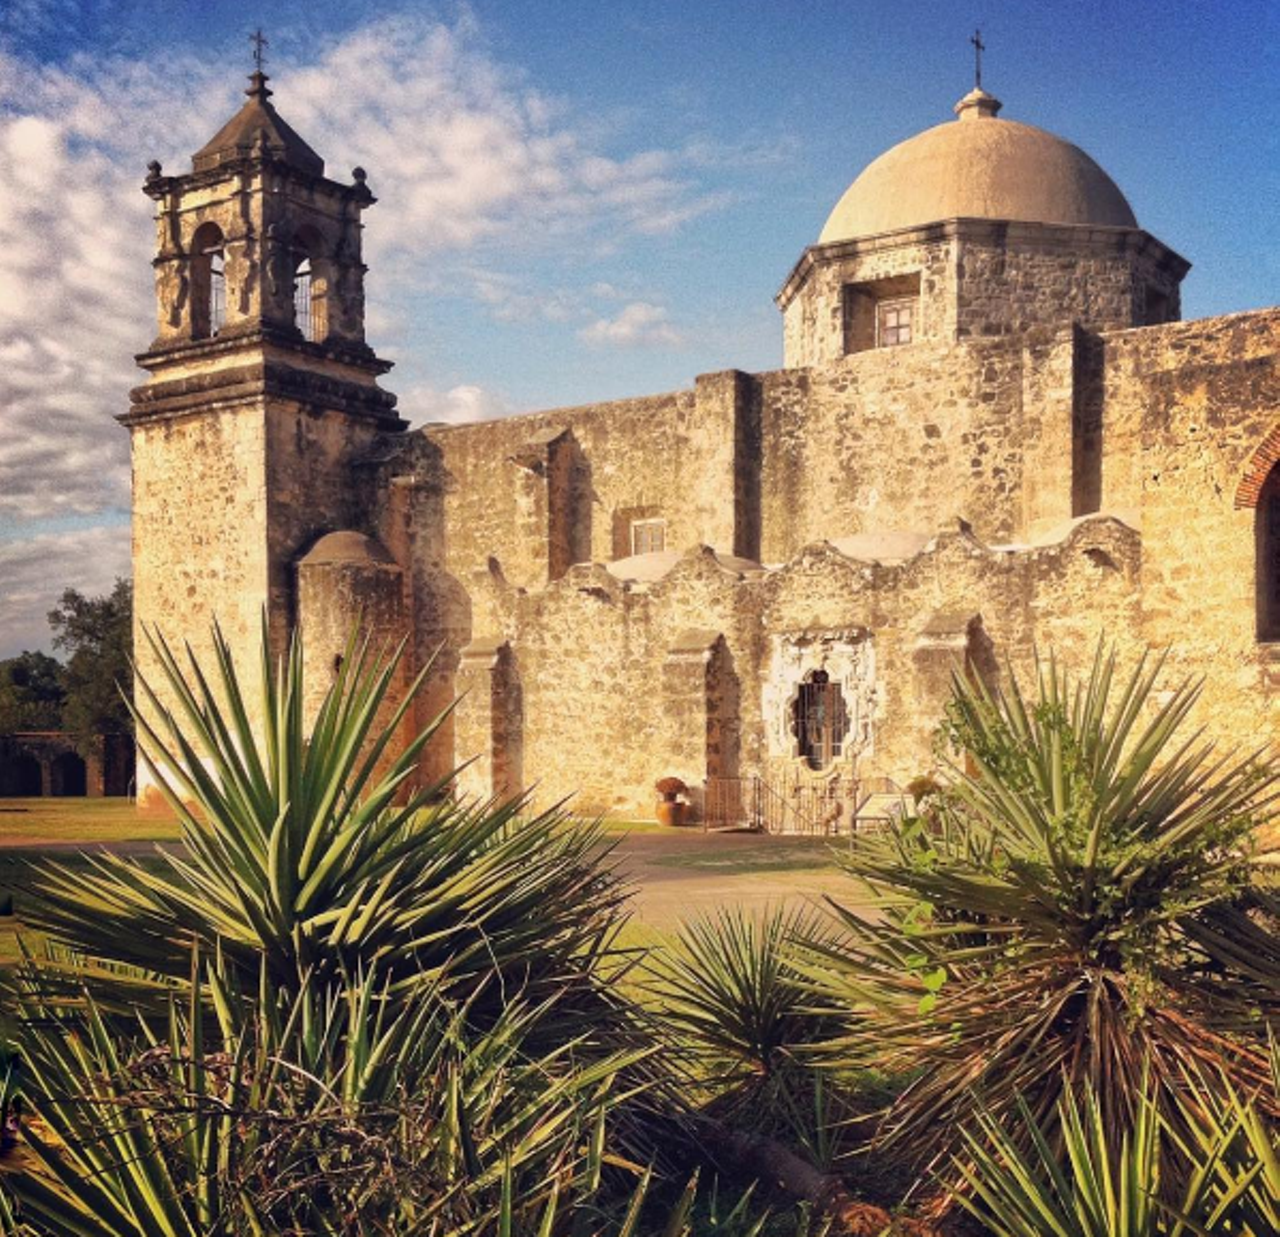 Stroll through the Missions National Park
6701 San Jose Drive, visitsanantonio.com
Take your date on a history lesson and walk through National Park and World Heritage Site. 
Photo by @aaronbates for @bigbendnps via Instagram, missionsnps